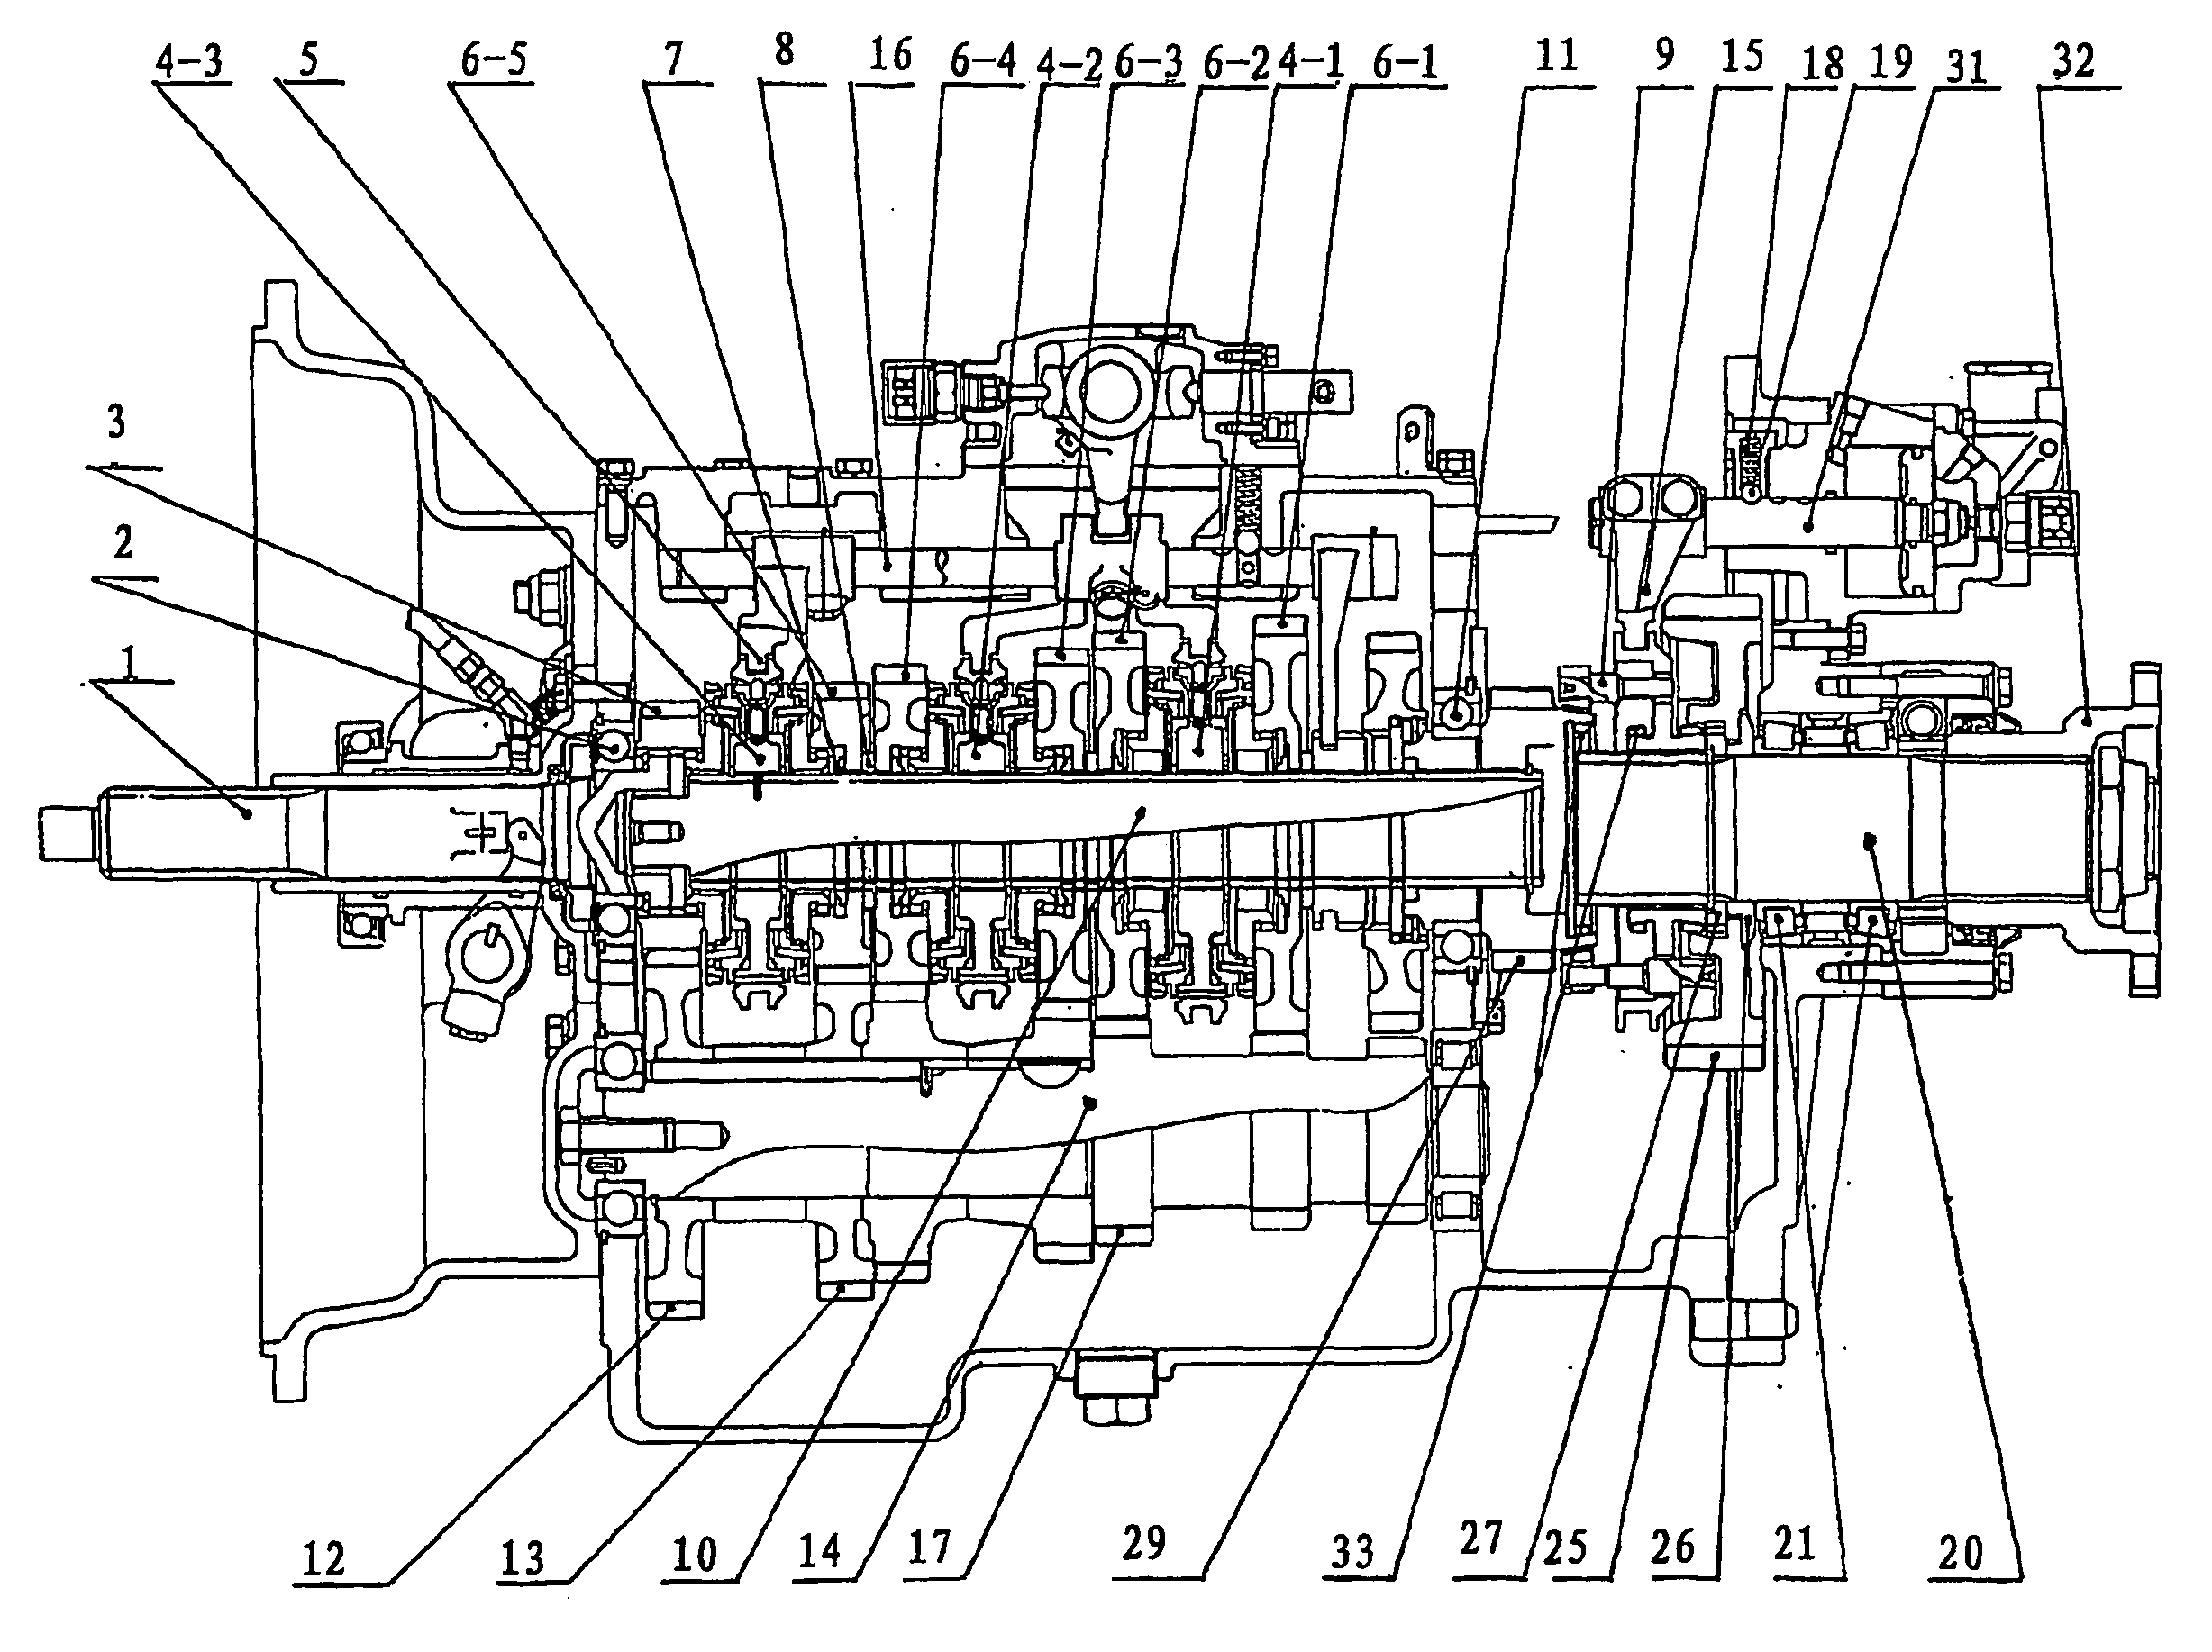 Main-Box-and-Auxiliary-Box -Structural Twin-Countershaft Twelve-Speed Transmission